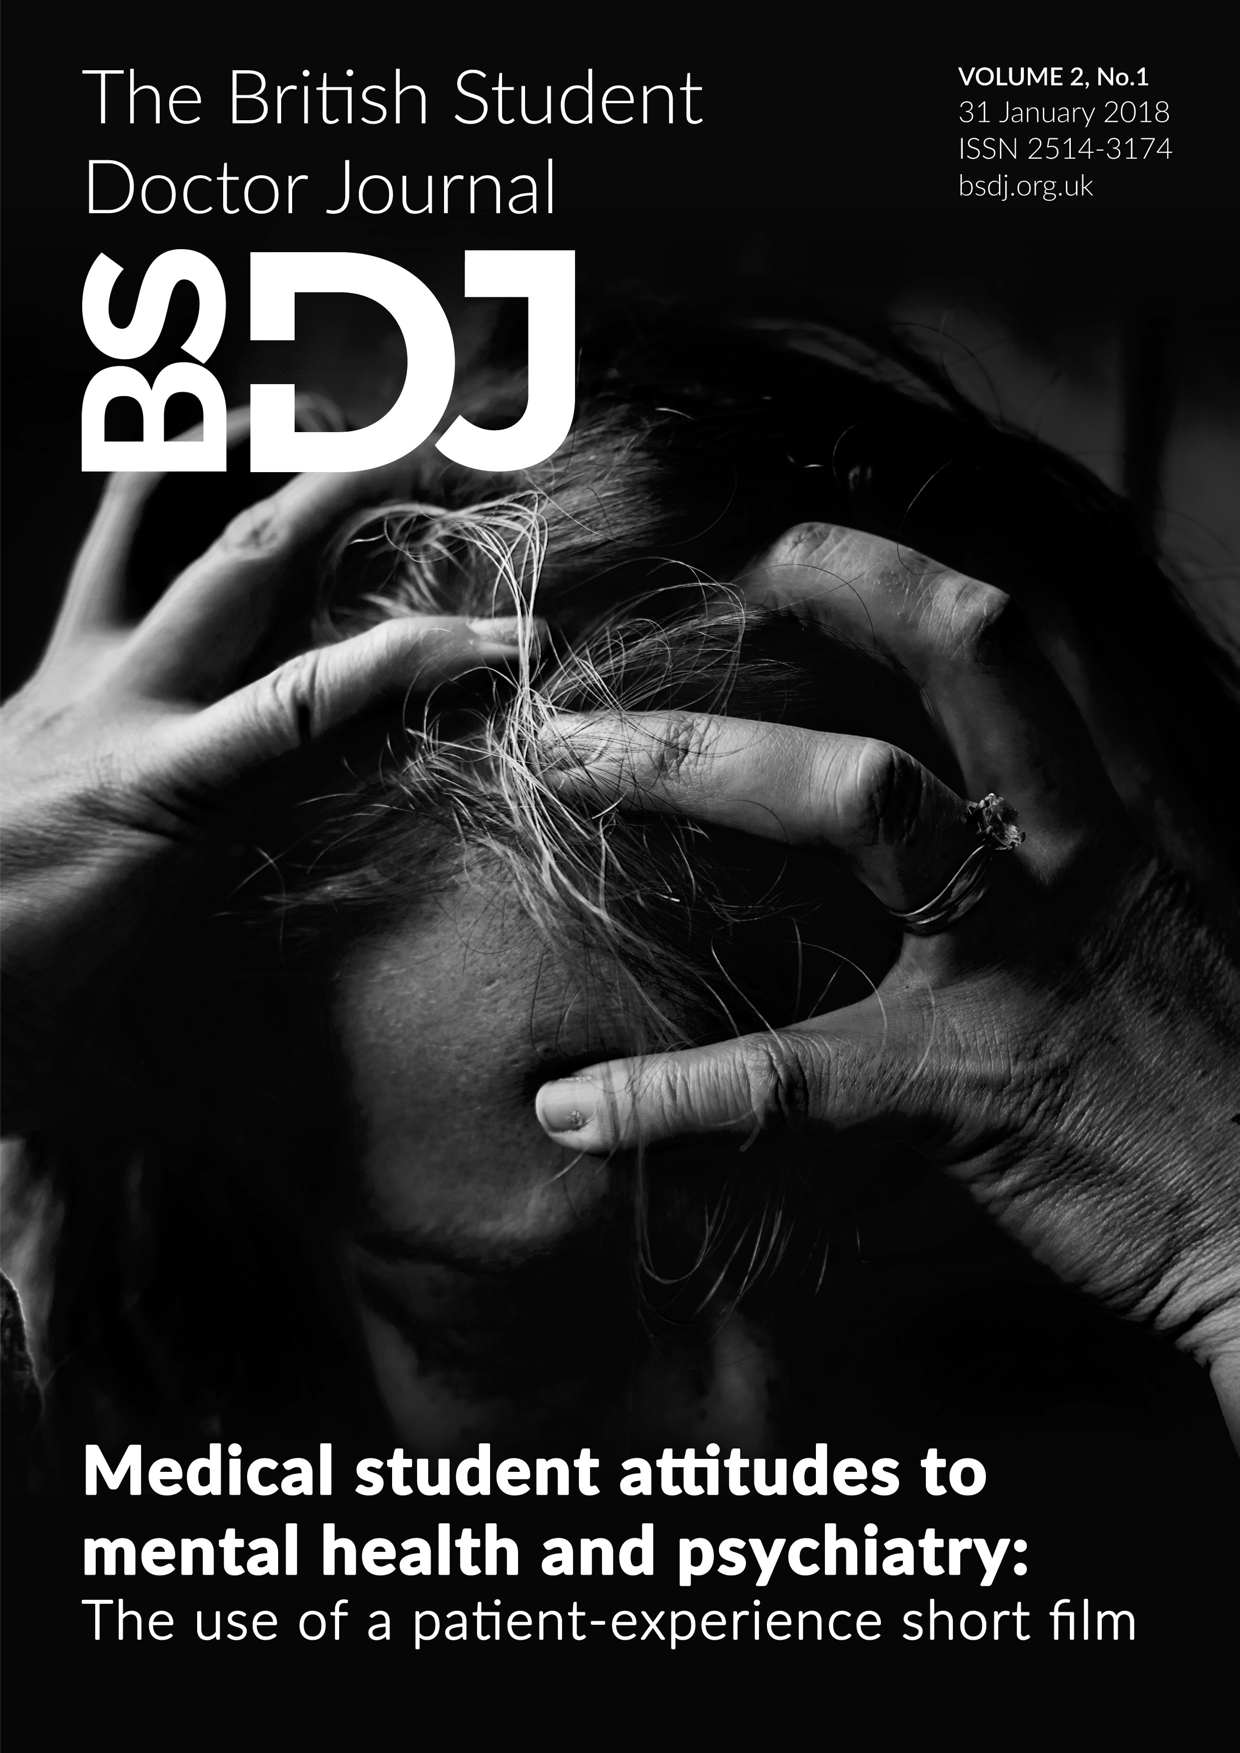 The British Student Doctor Vol 2, No 1